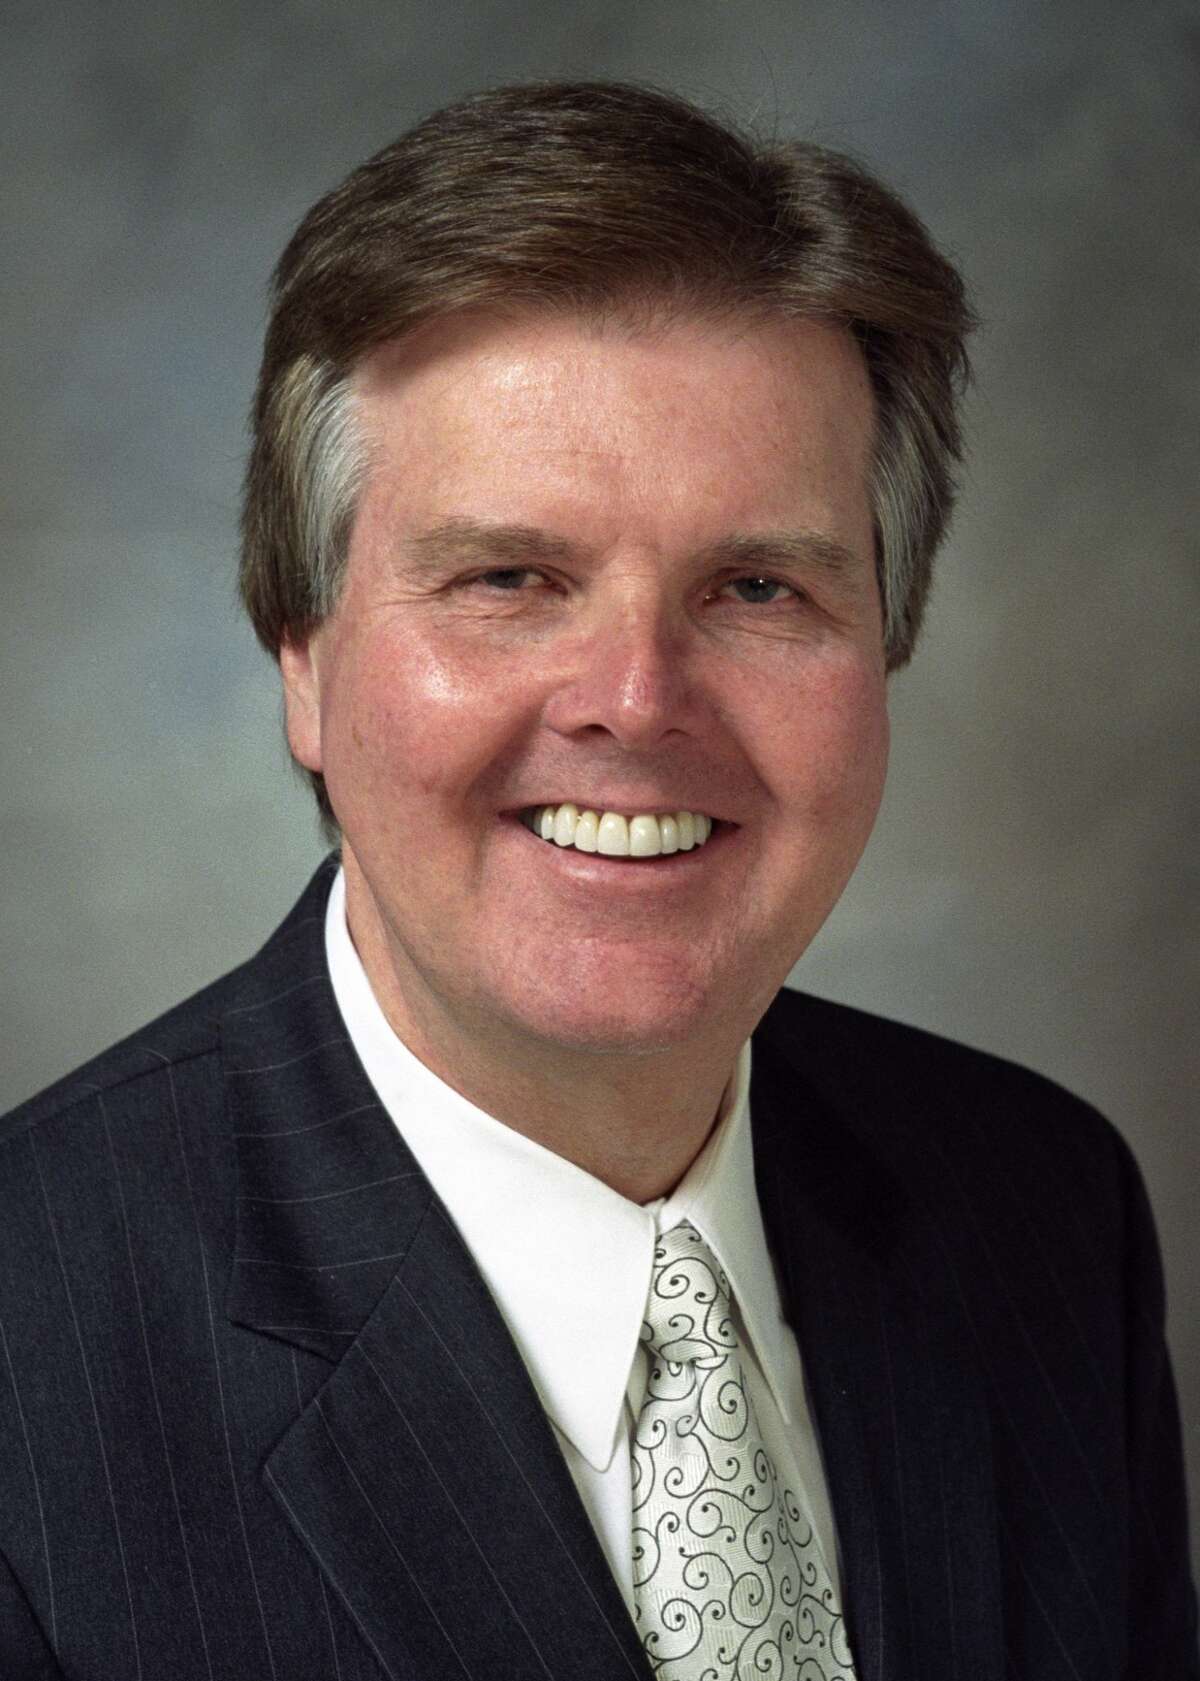 Lt. Gov. Dan Patrick will give the keynote address at the 54th annual meeting of the Permian Basin Petroleum Association.  